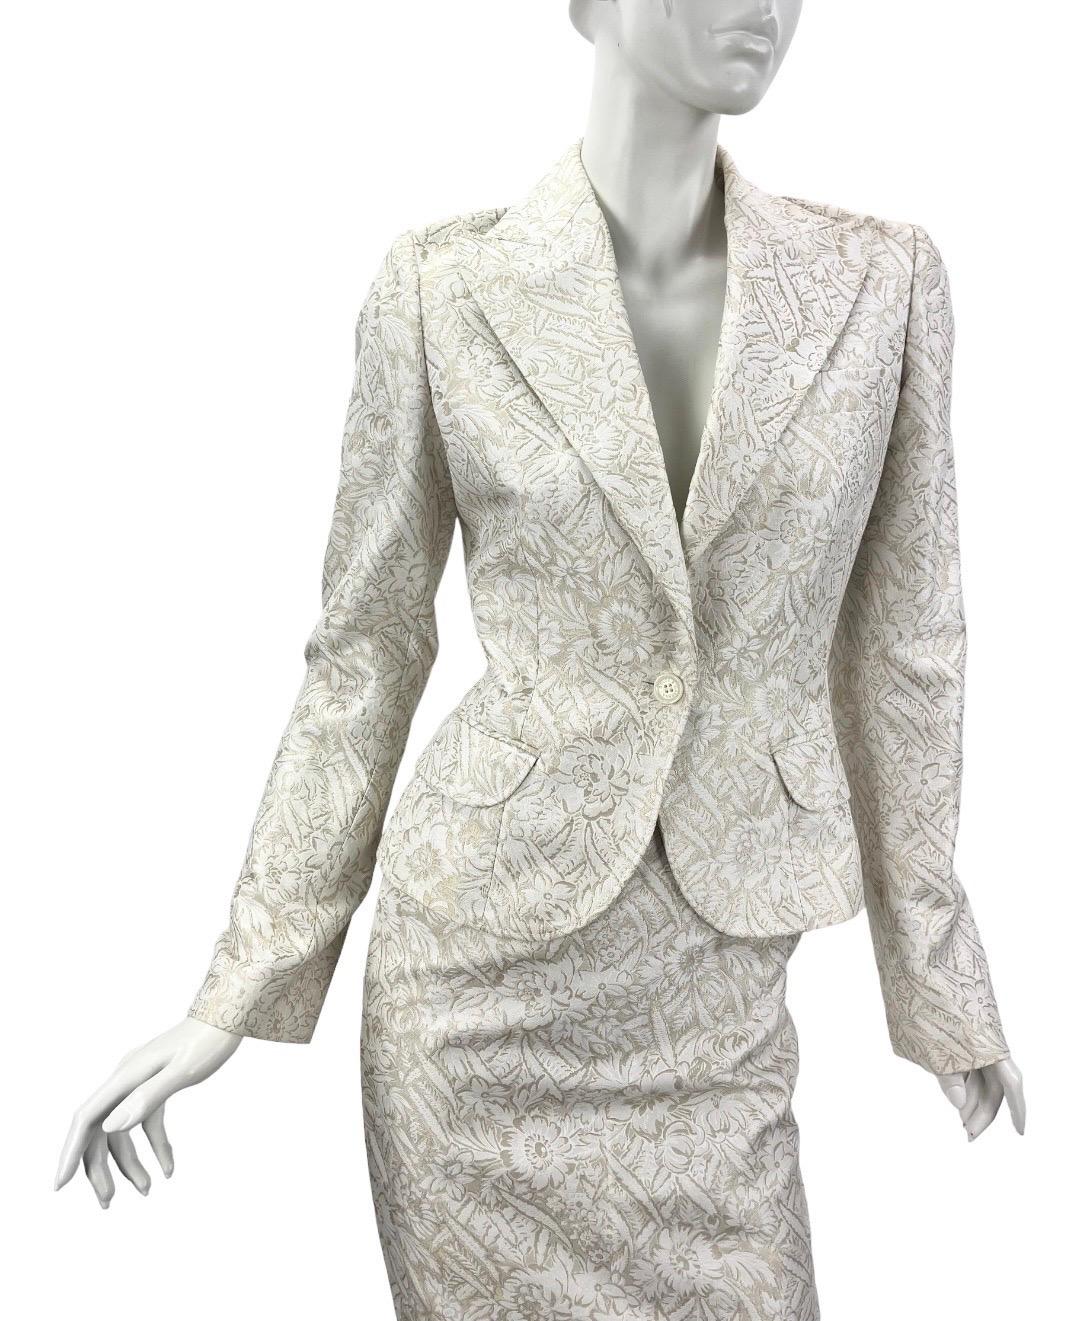 Early 2000-s Vintage Dolce & Gabbana White Gold Floral Jacquard Skirt Suit   In Excellent Condition For Sale In Montgomery, TX